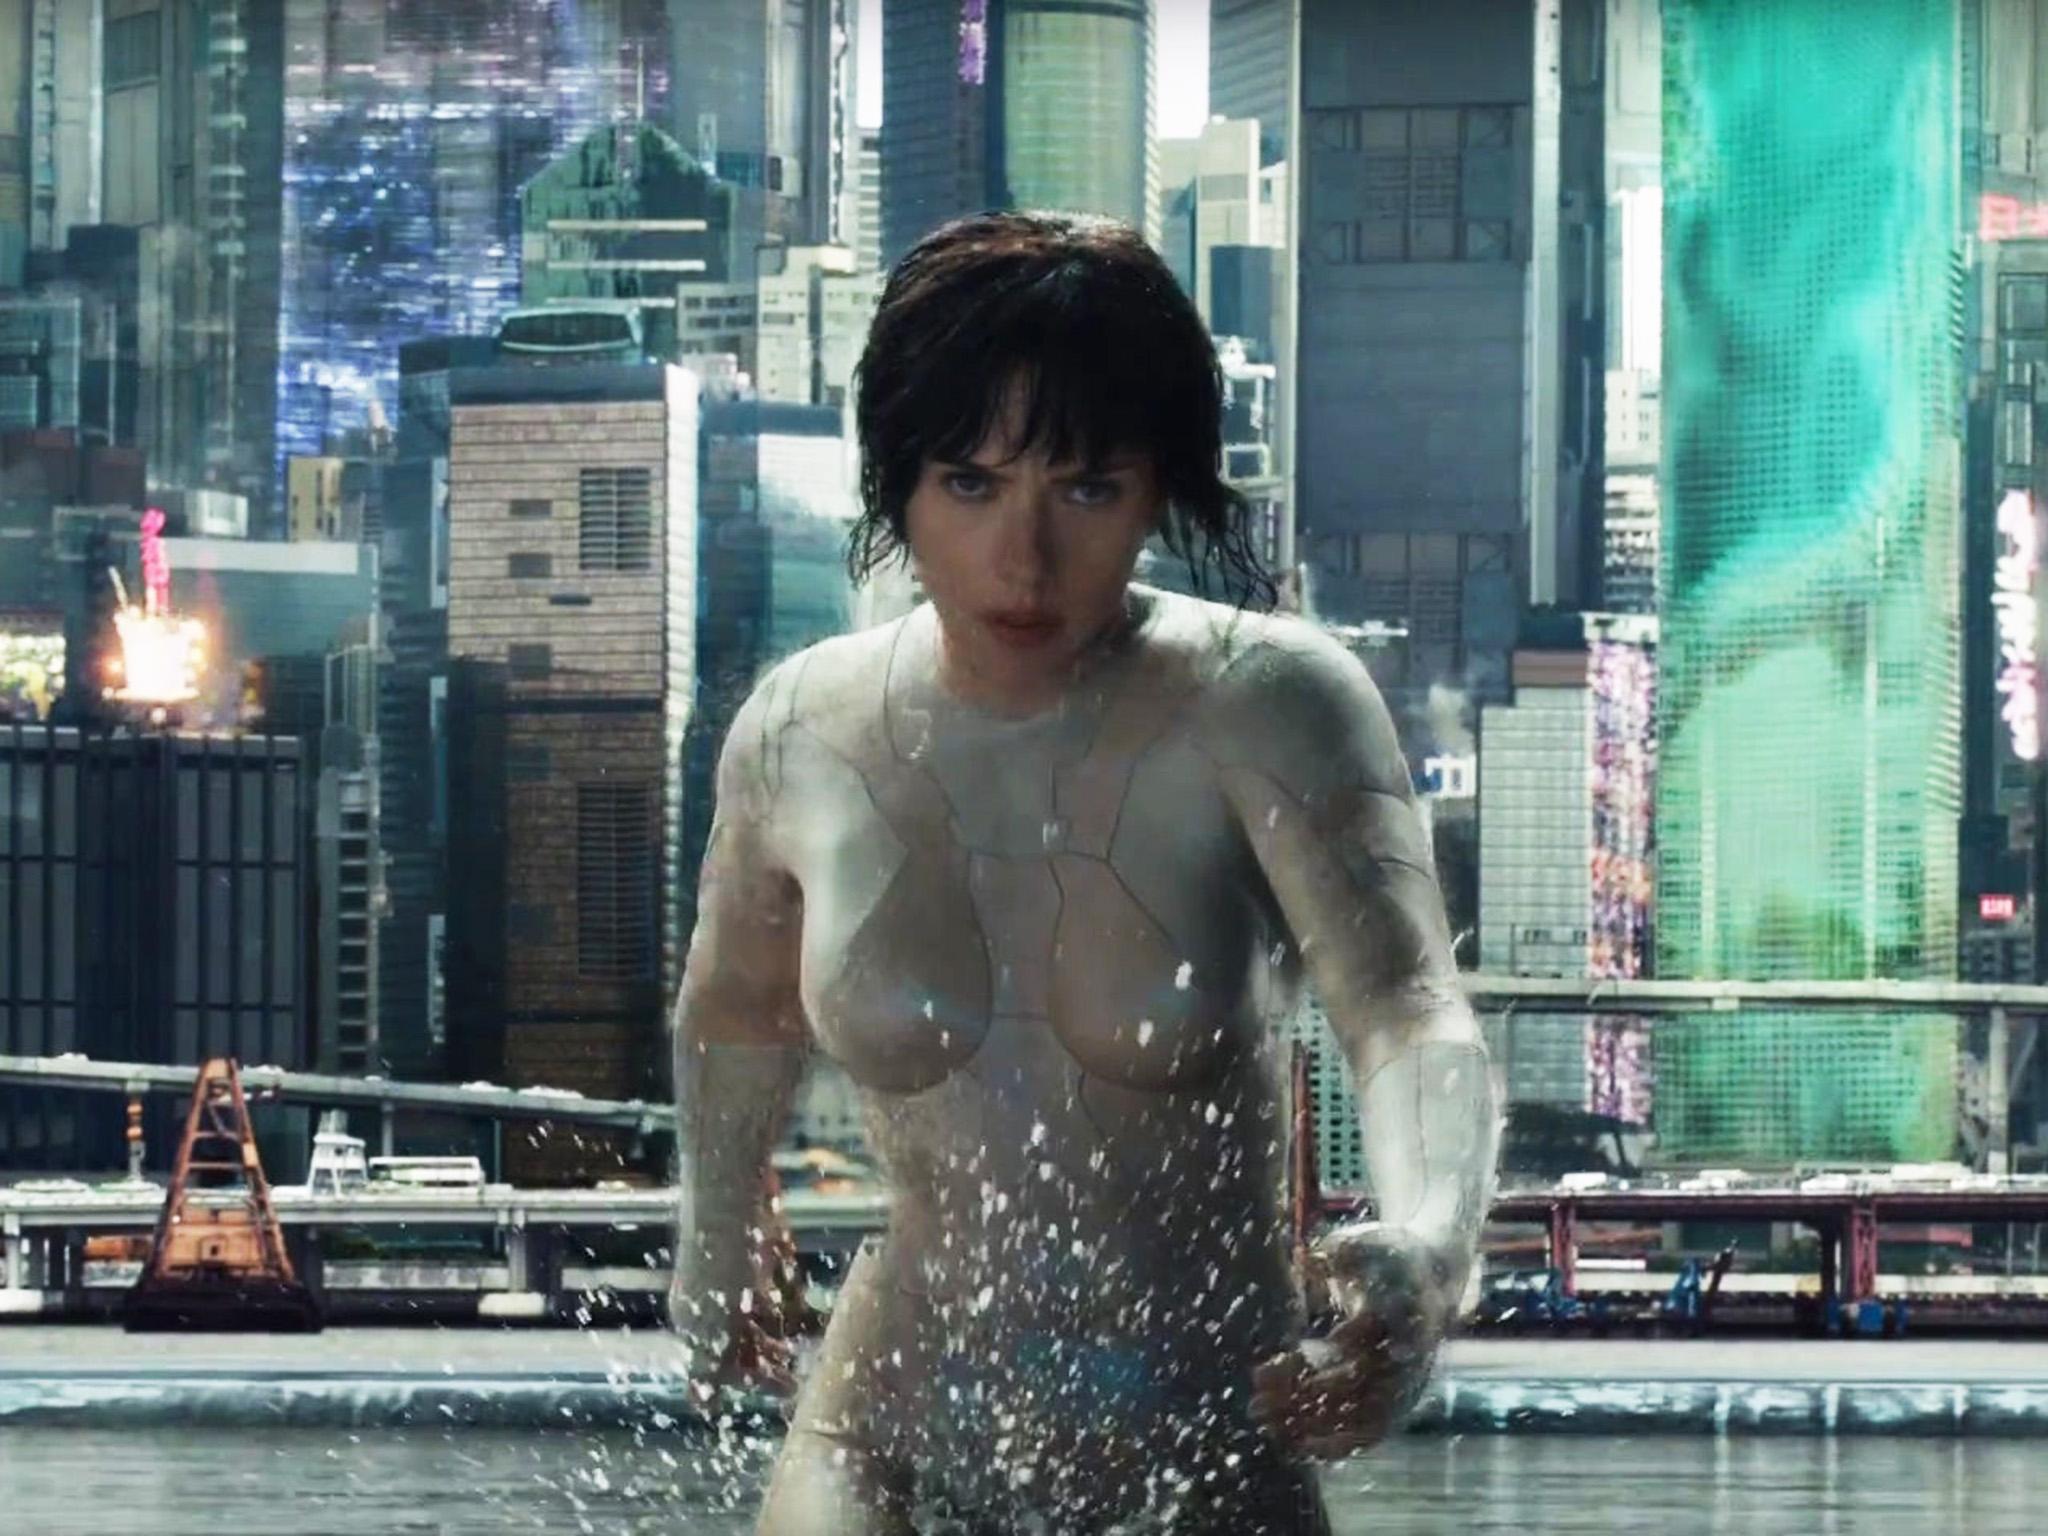 The highly anticipated 'Ghost in the Shell' is set in Hong Kong